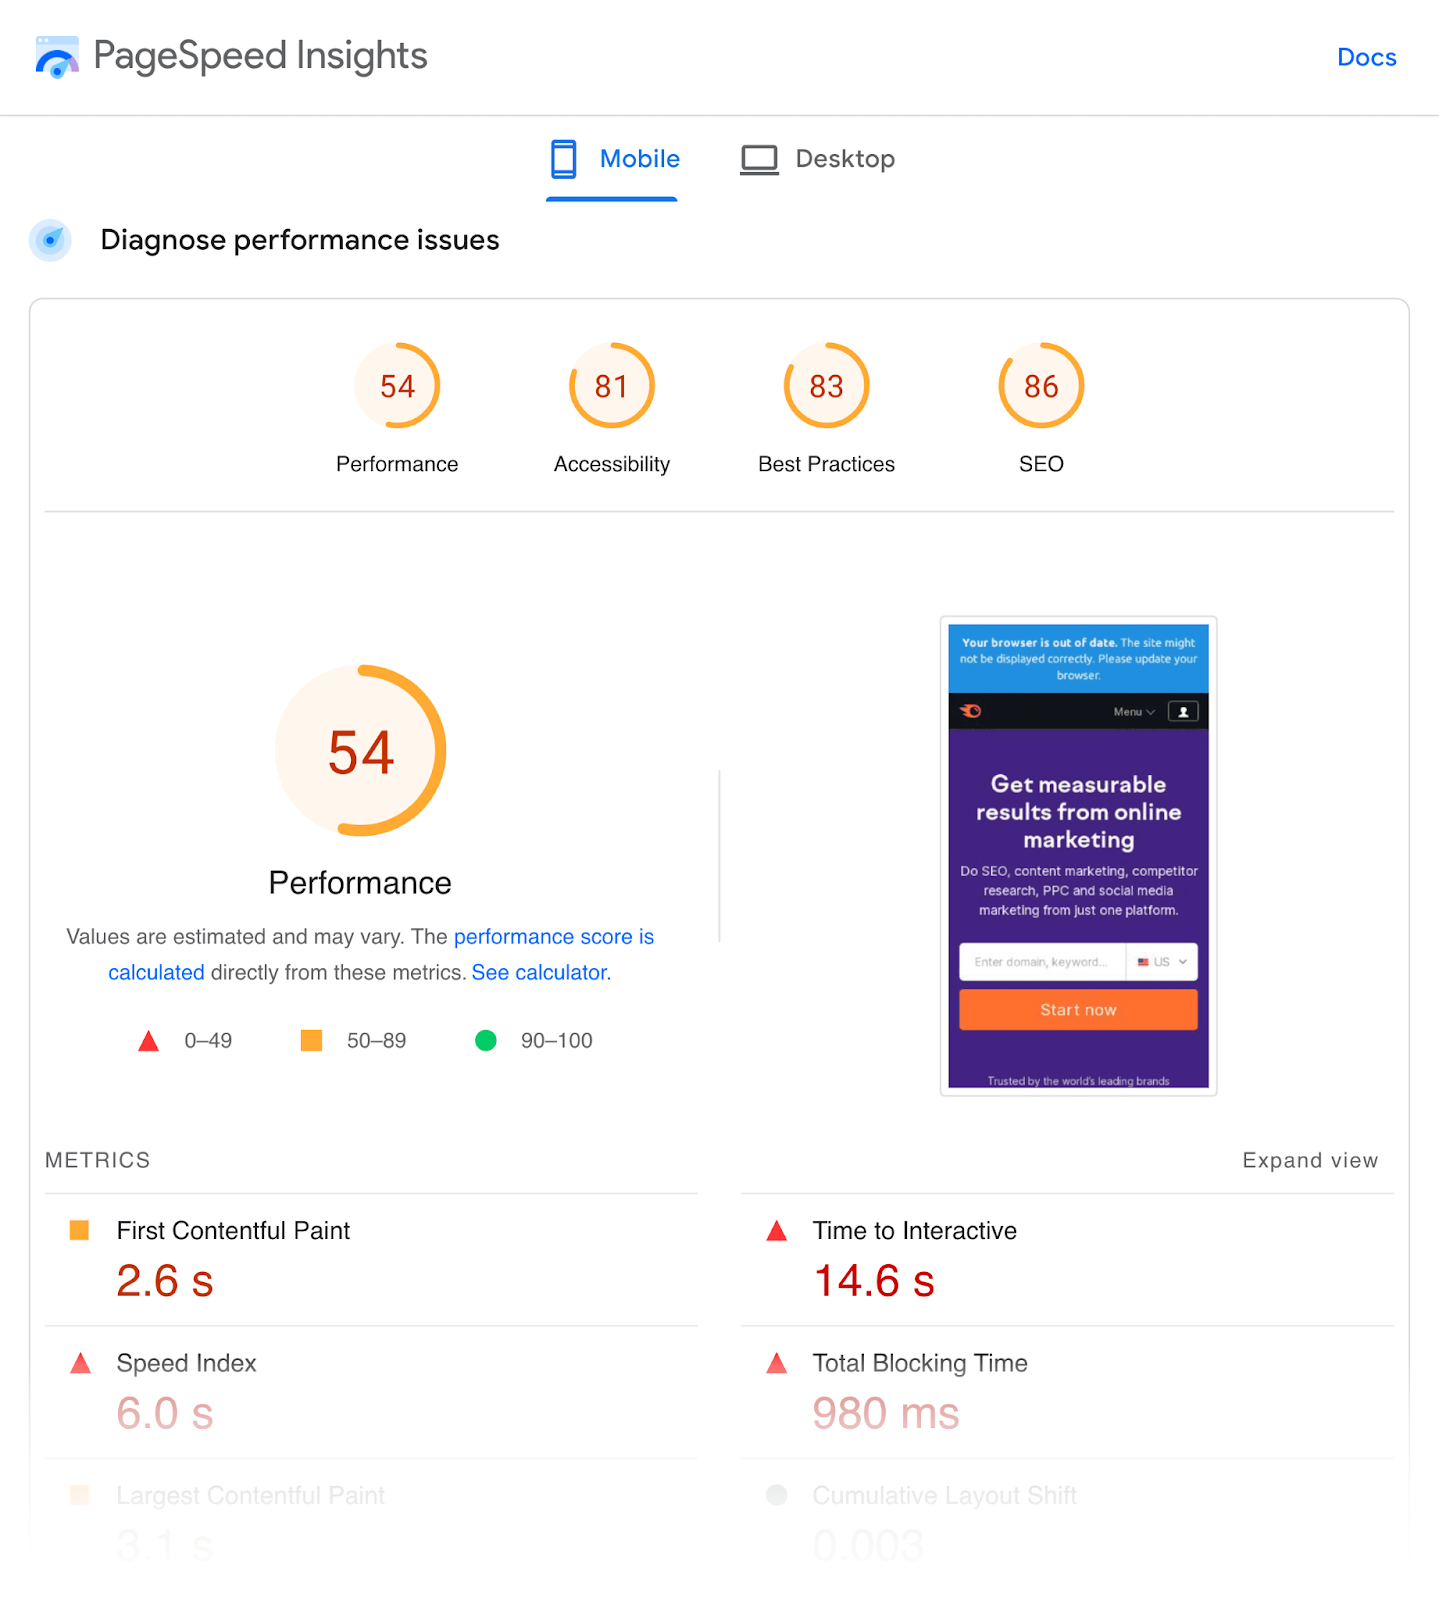 PageSpeed Insights' mobile performance dashboard